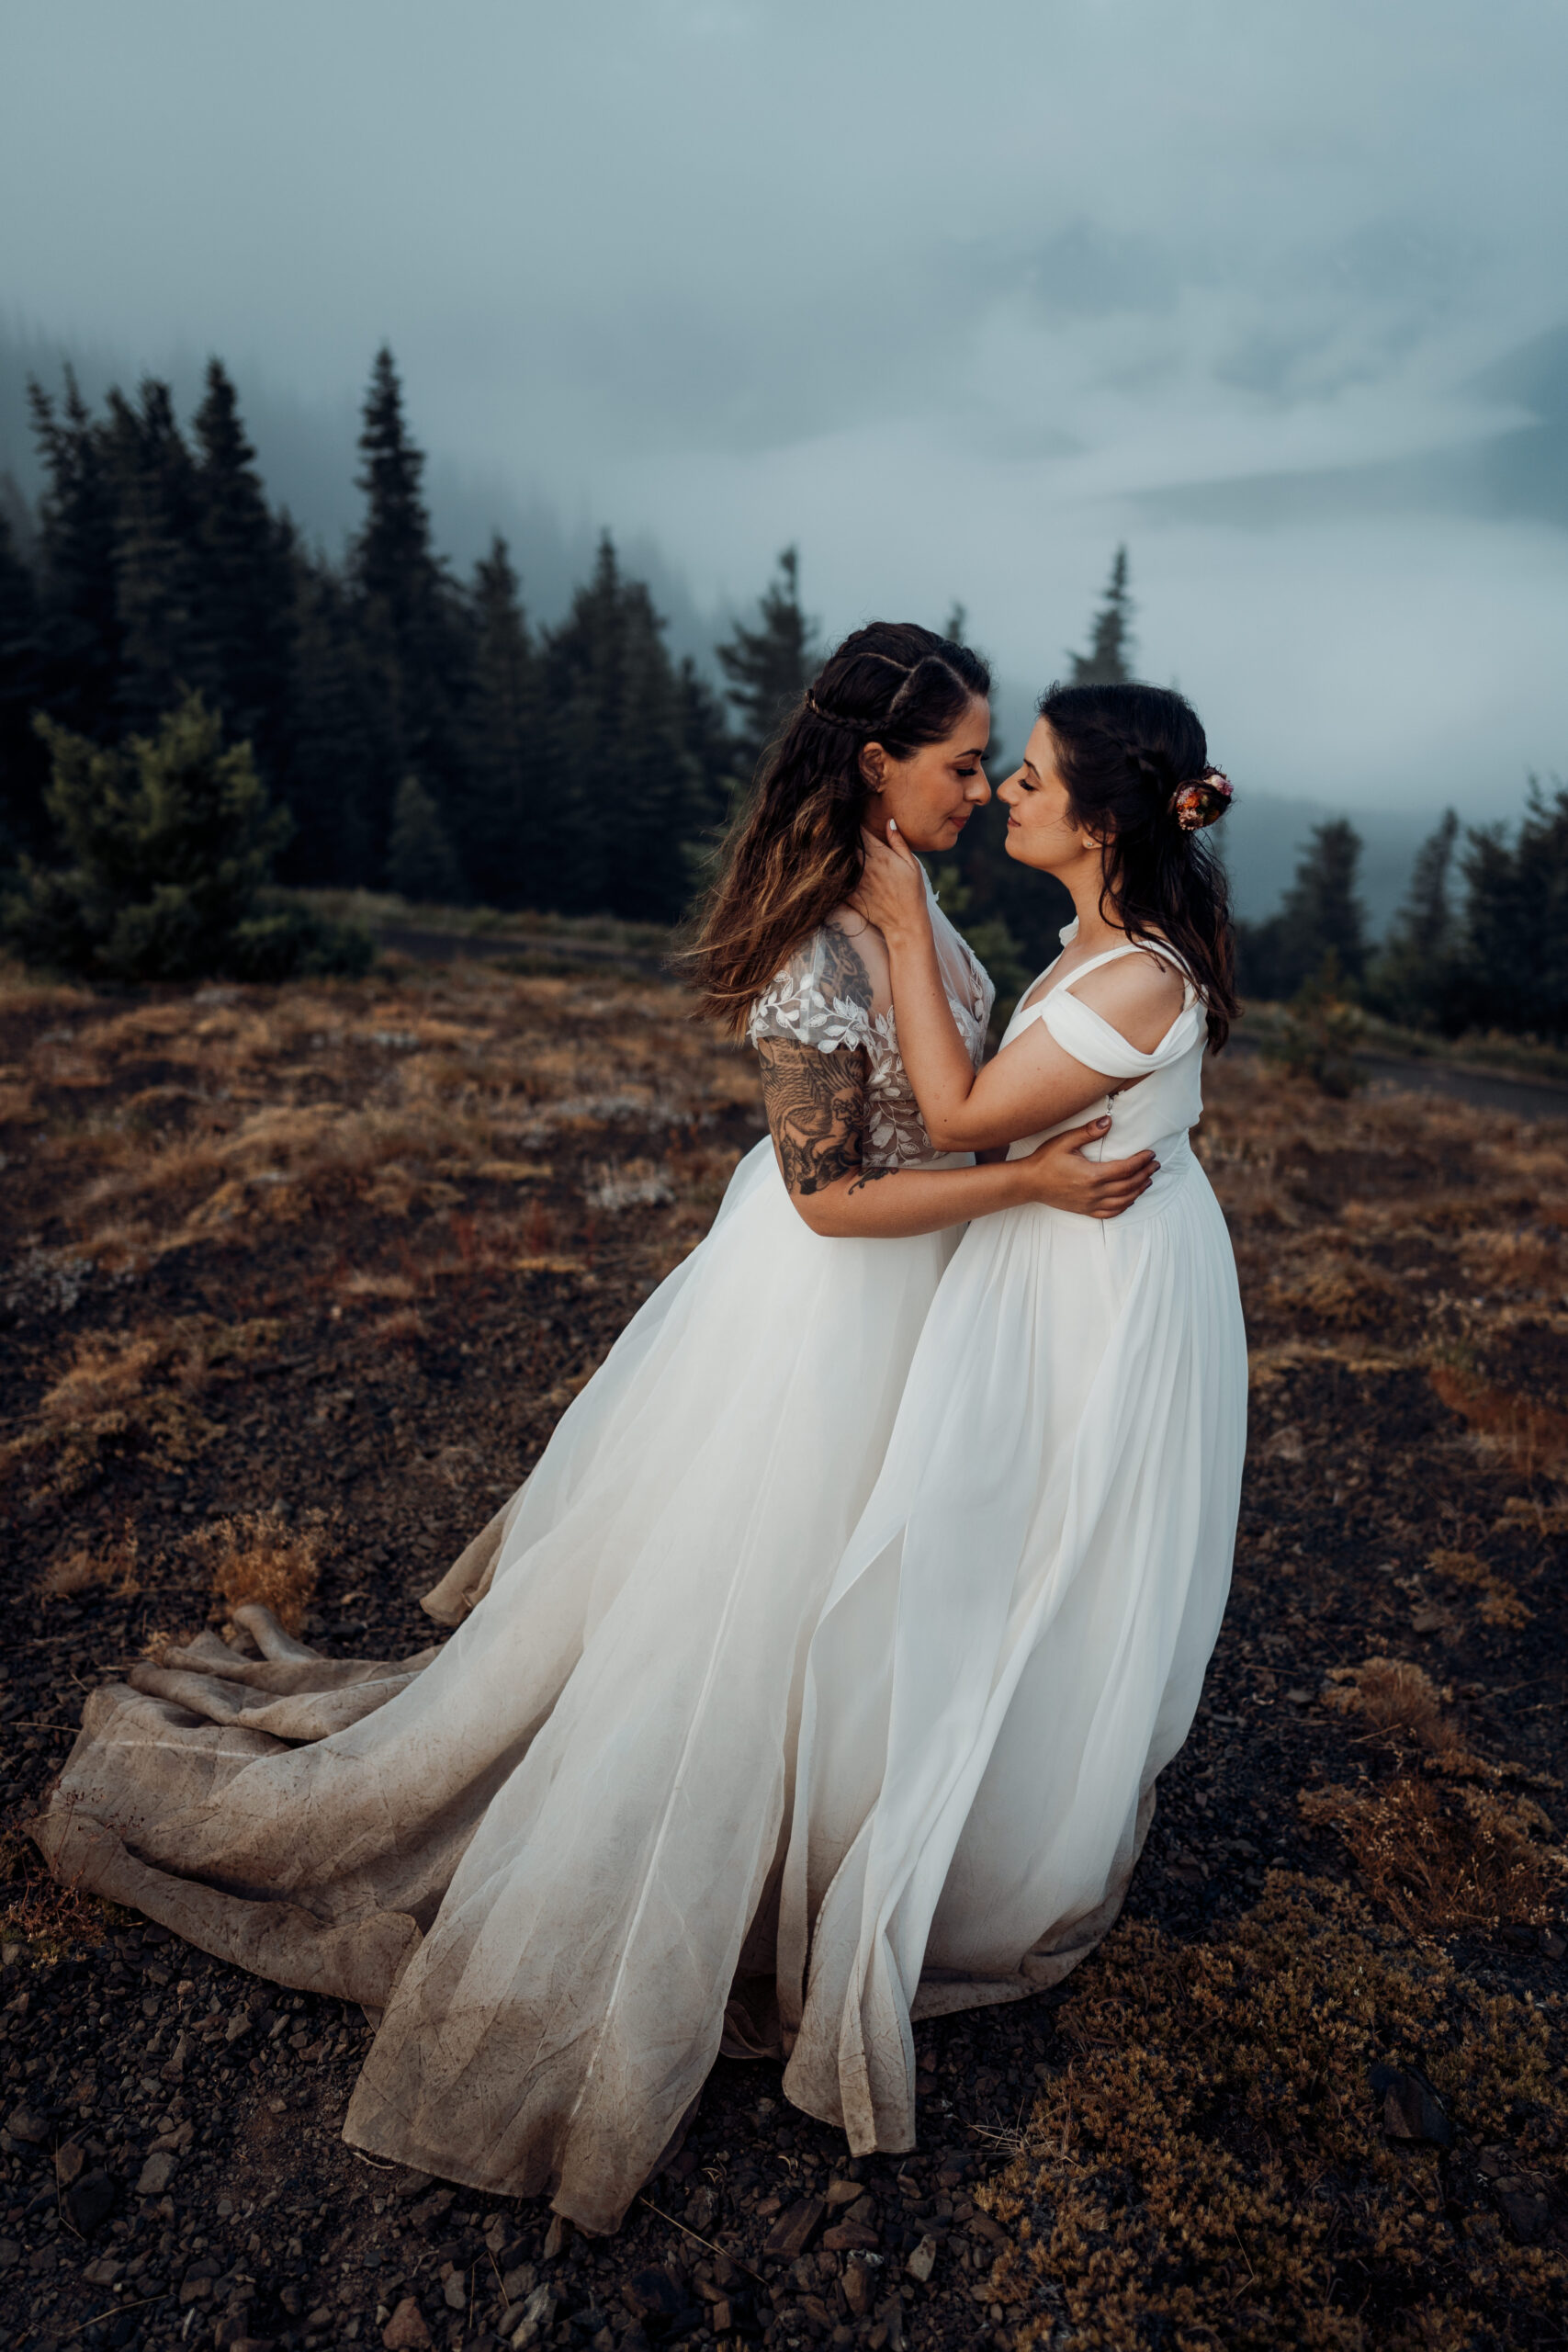 Gown Goals: 5 Tips on how to pick your adventure elopement dress